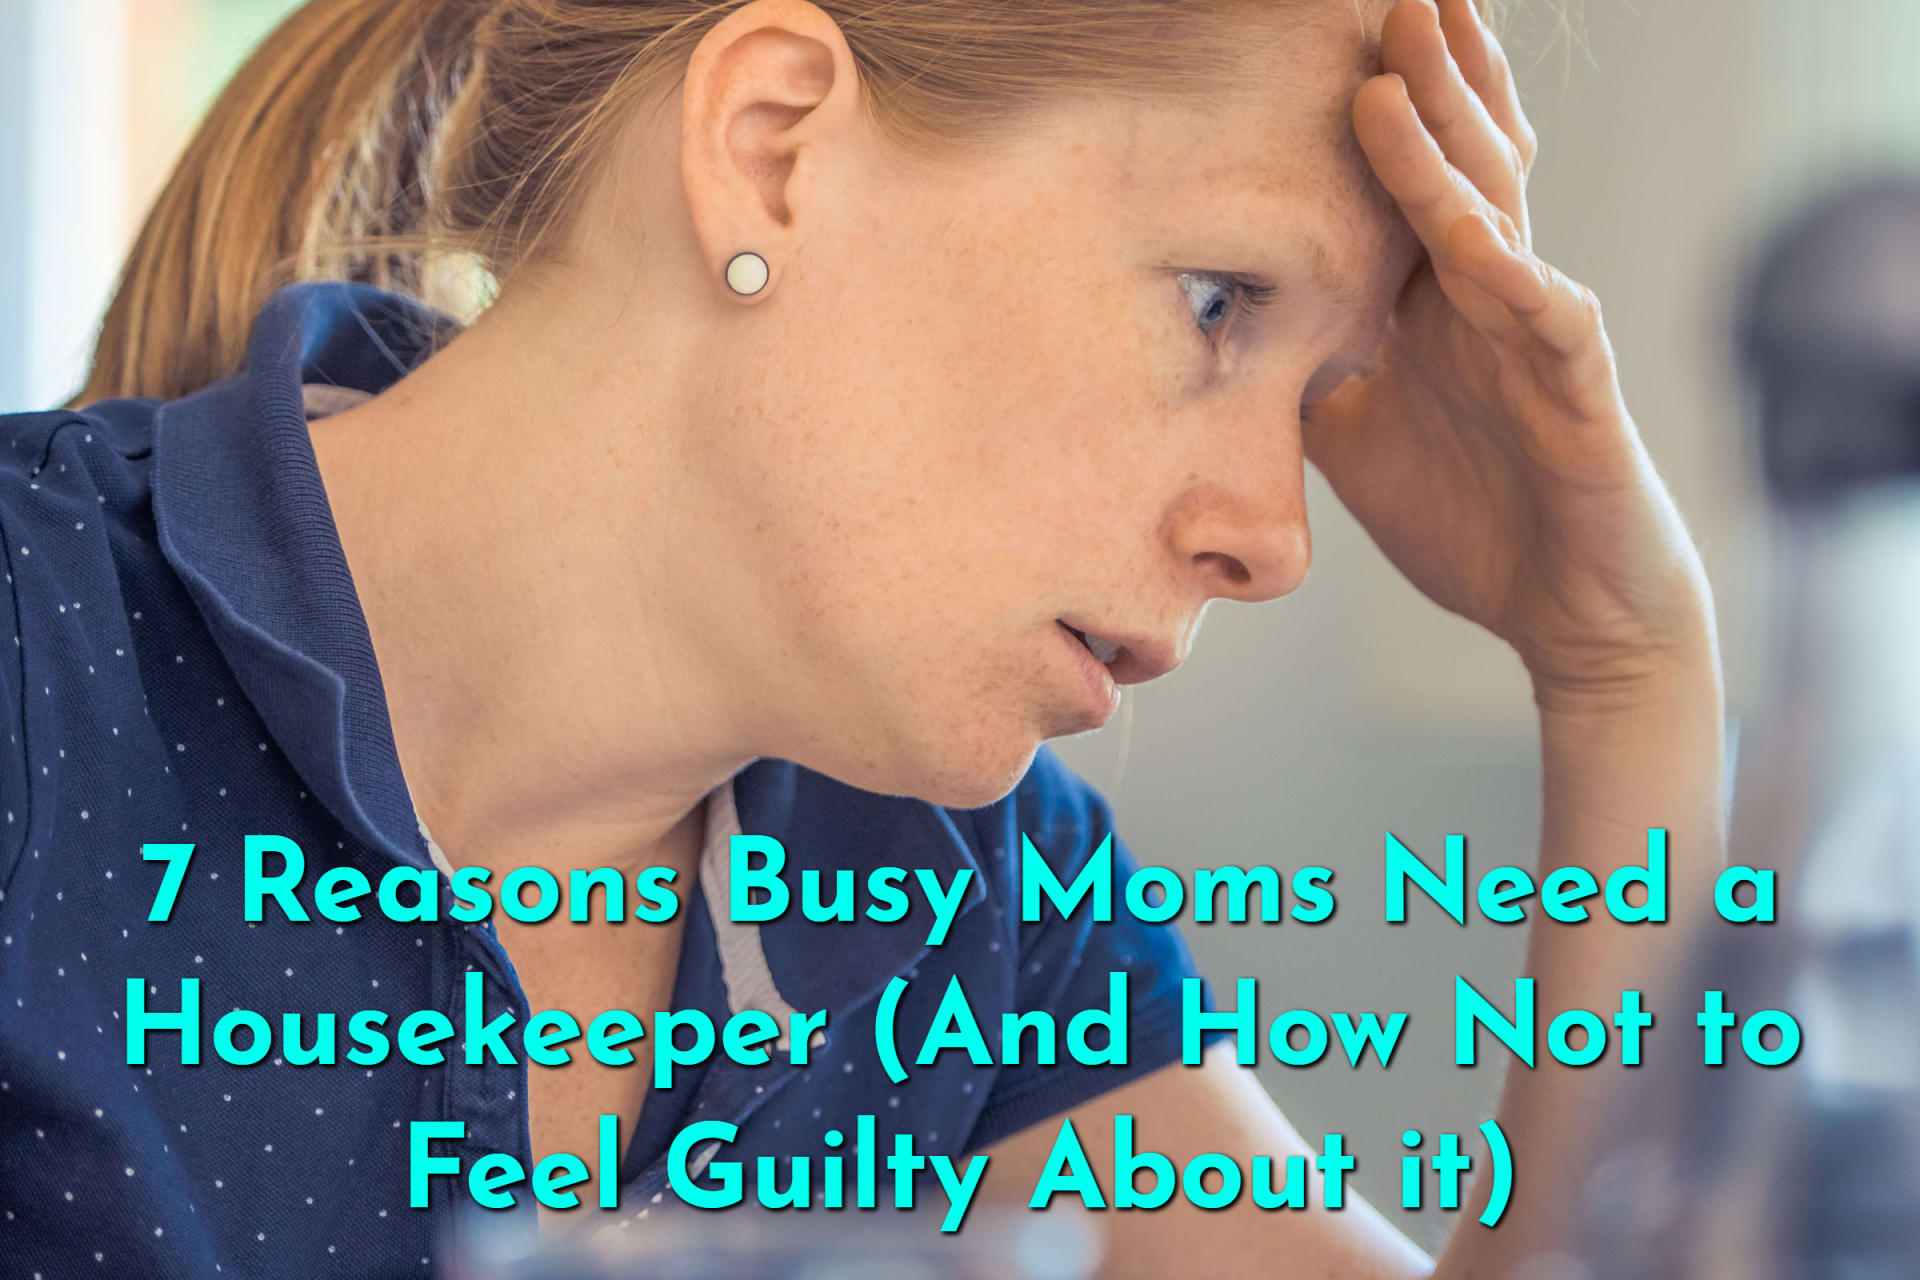 7 Reasons Busy Moms Need a Housekeeper (and How Not to Feel Guilty About It)